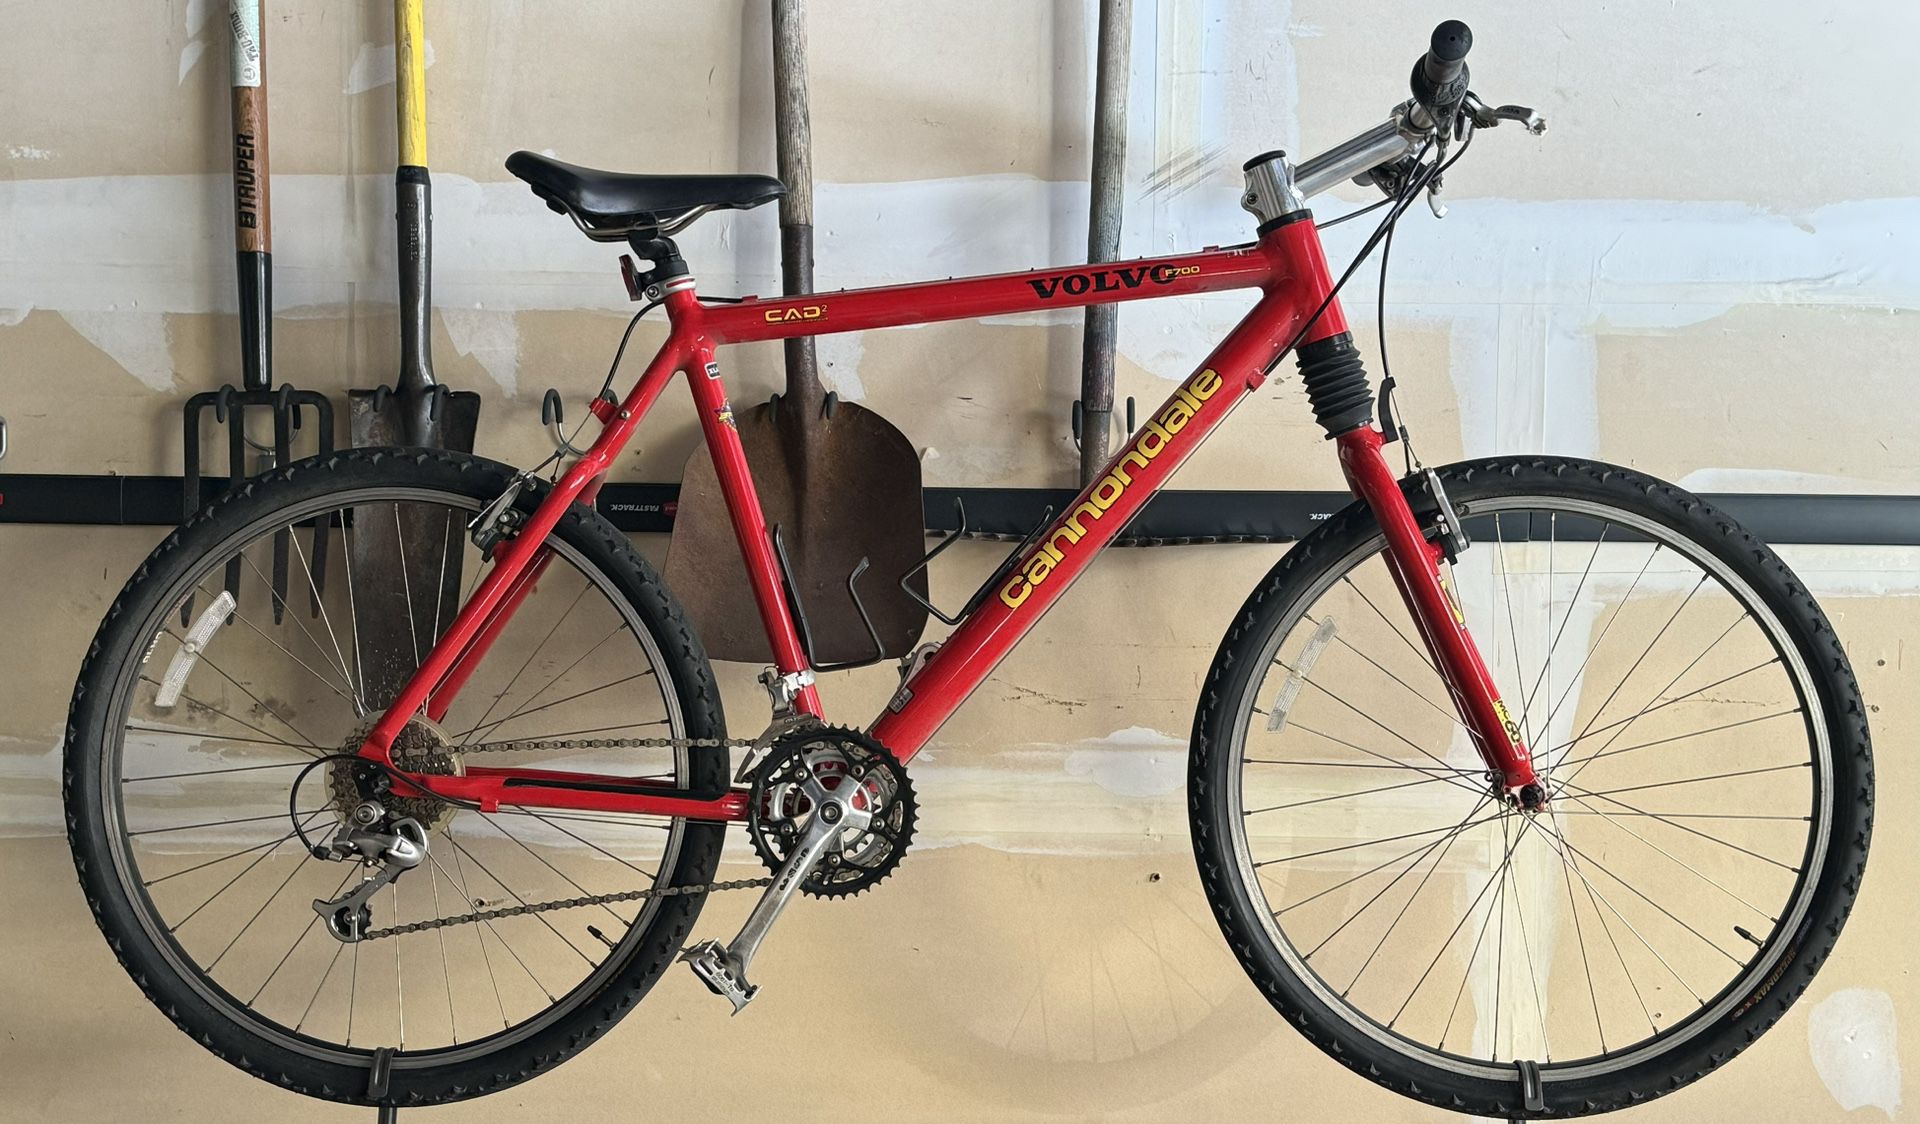 Volvo Cannondale F700 CAD2 Bicycle 